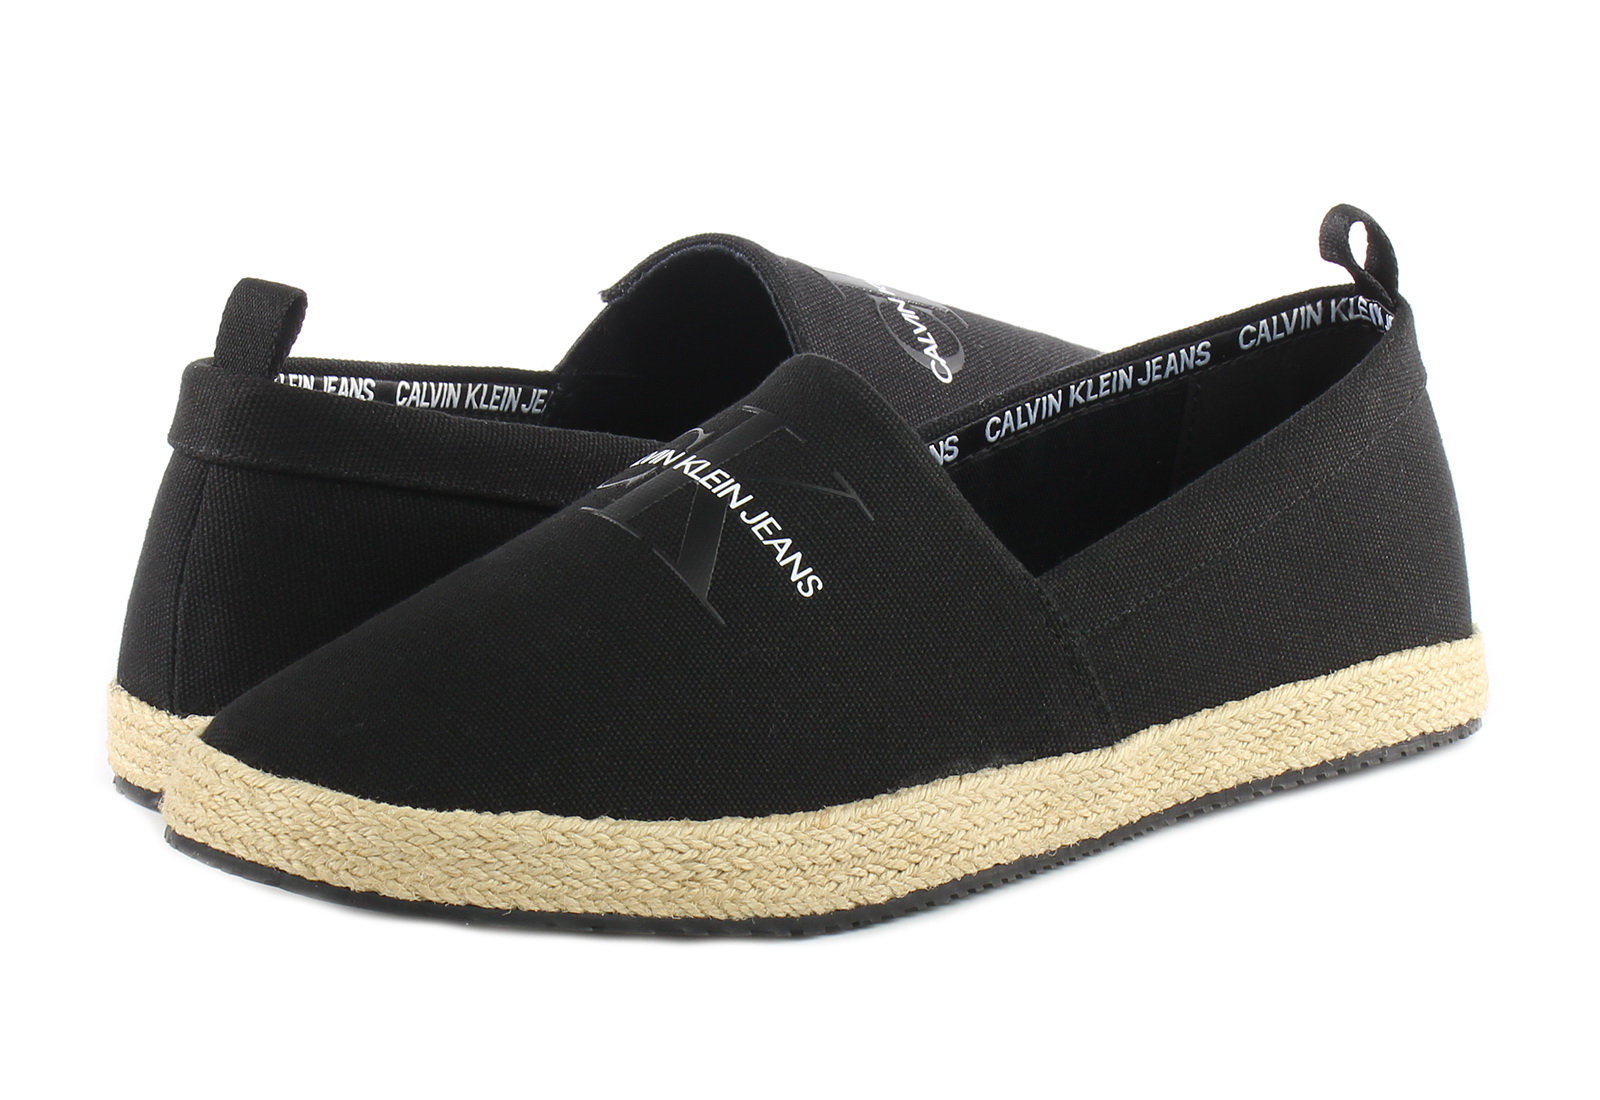 Calvin Klein Espadrilles - Emanuel - YM00010-BDS - Online shop for  sneakers, shoes and boots